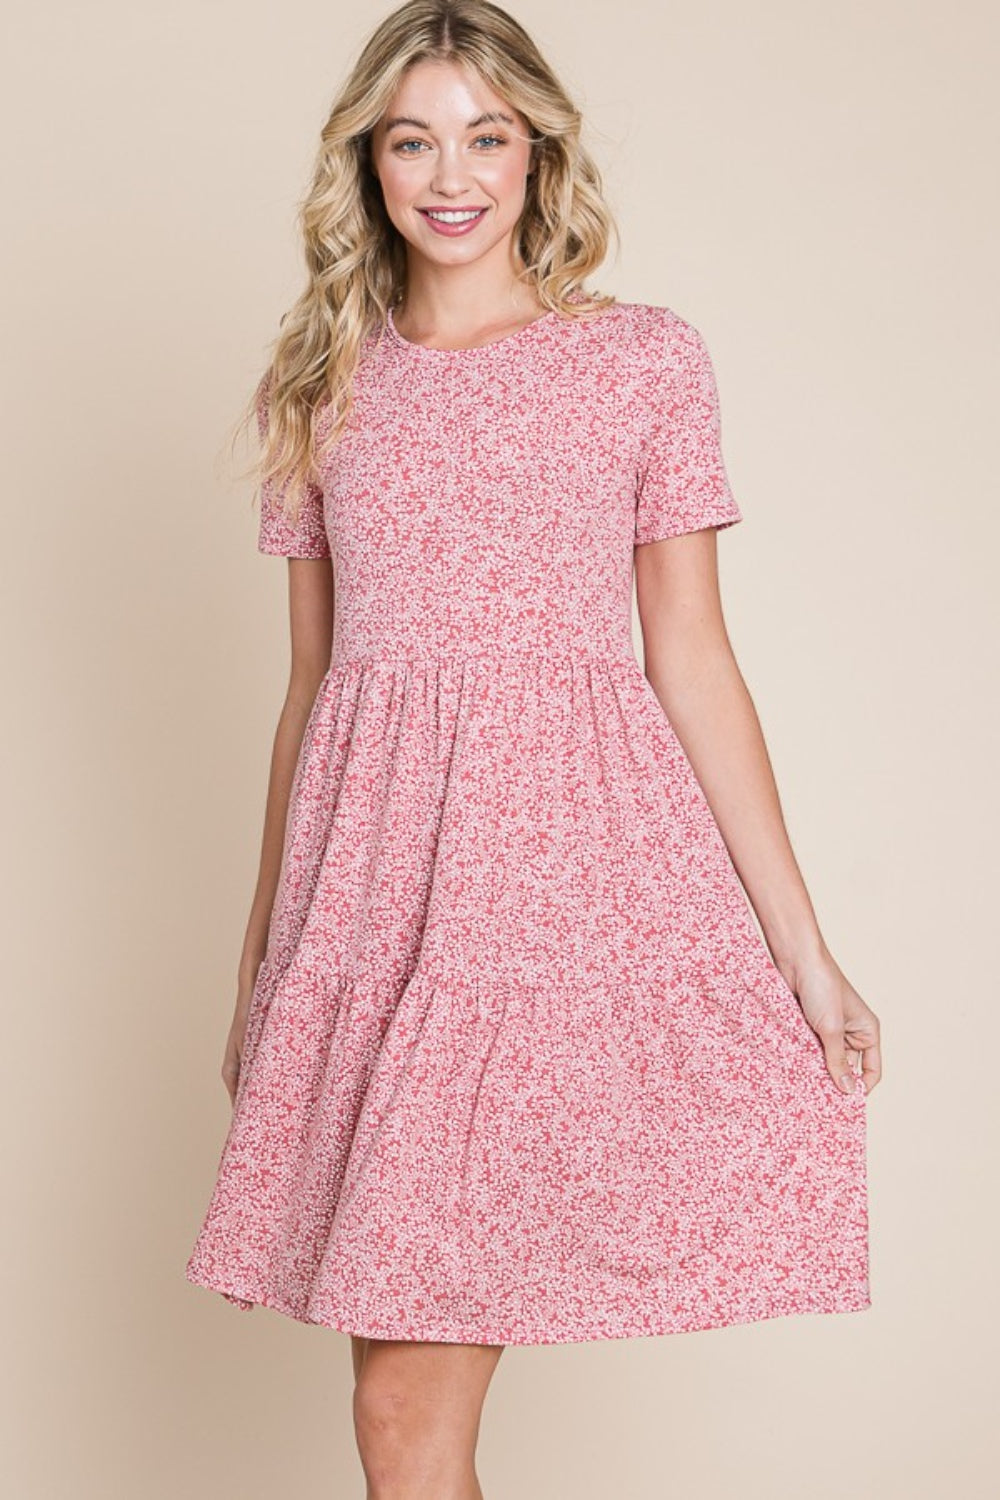 Sweet Melodies Dress - Joy & Country